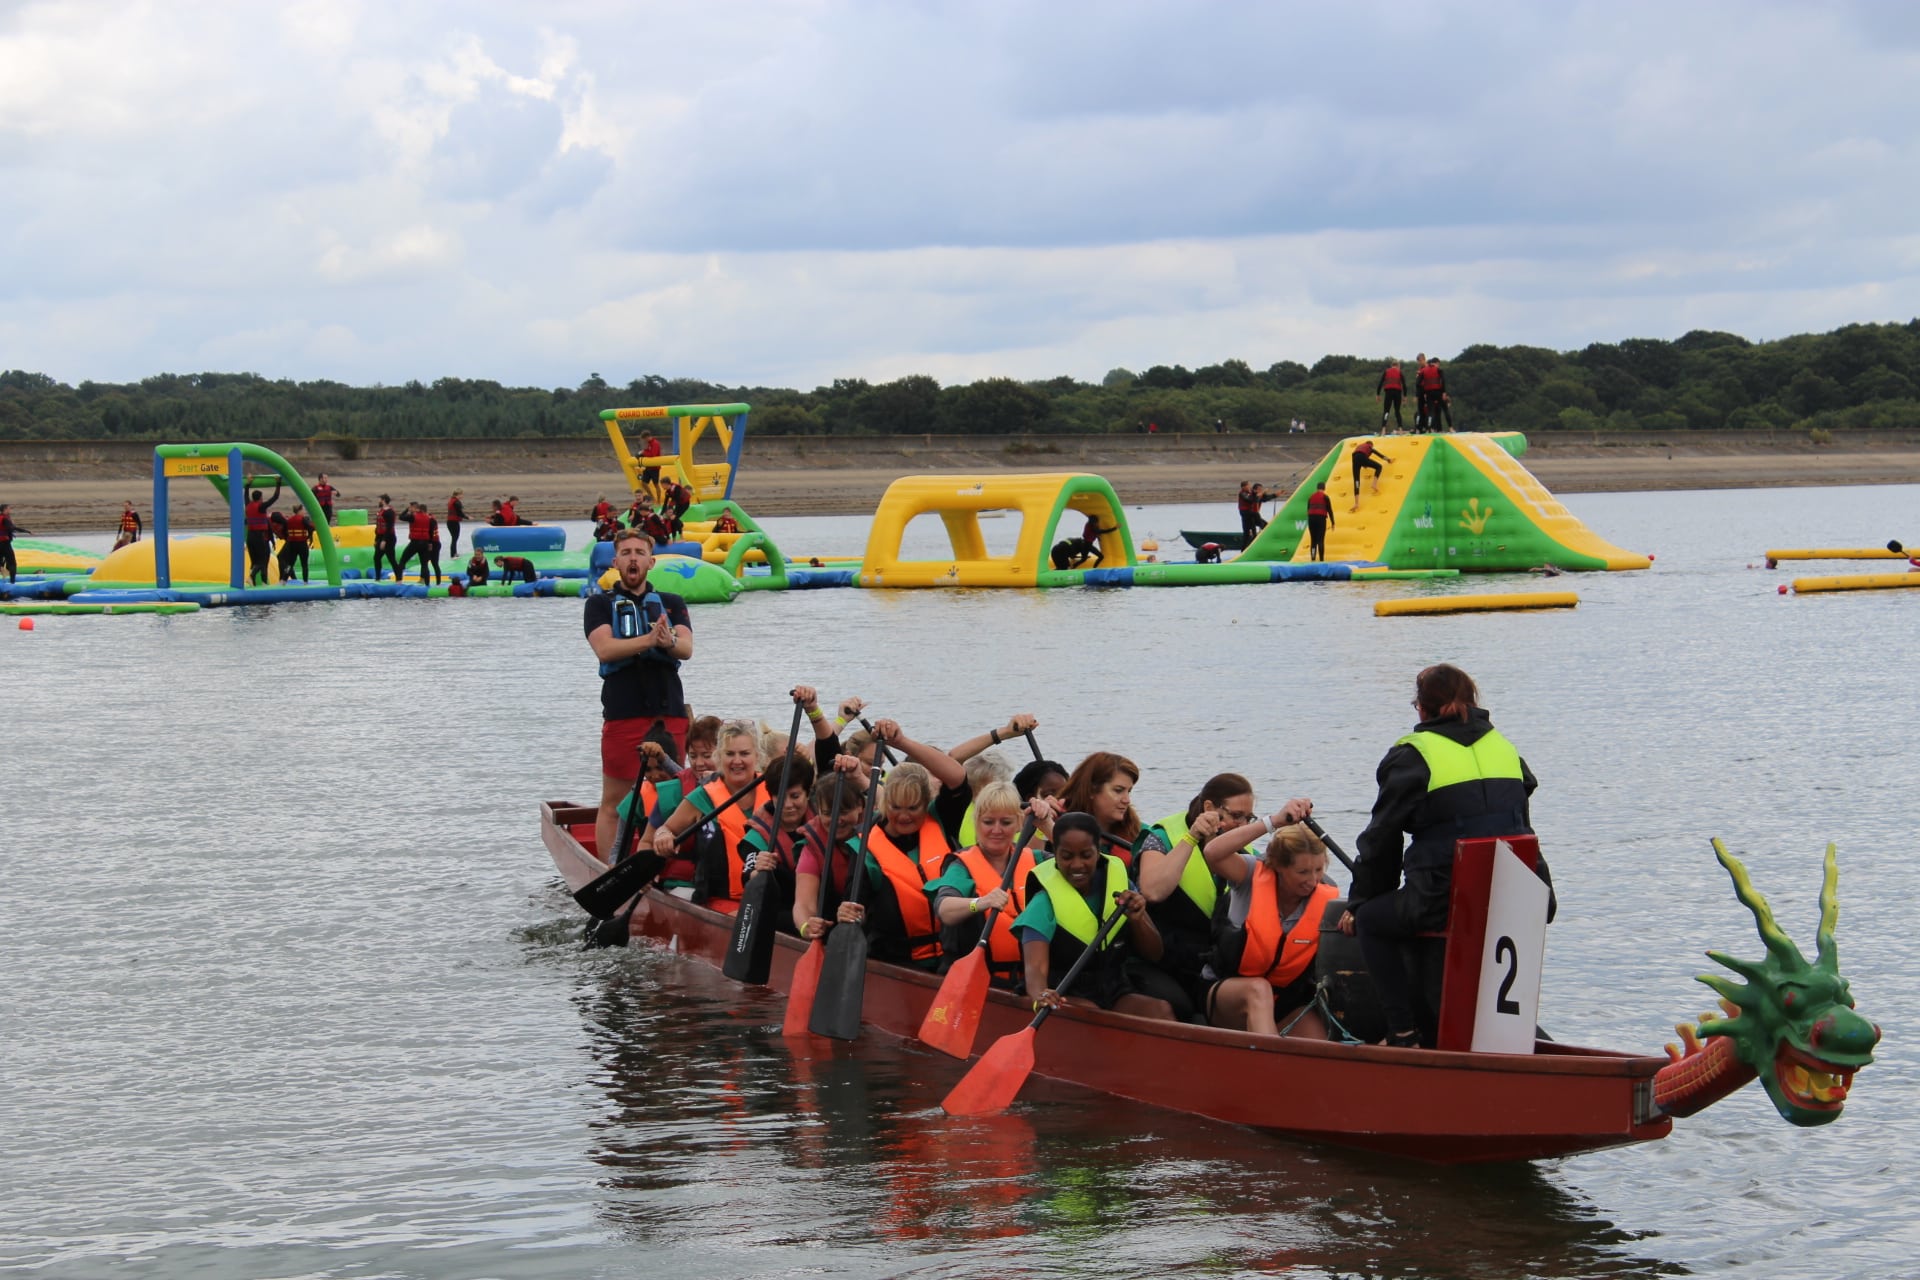 People Participating in the Dragon Boat Race Festival with Aqua Park in the background